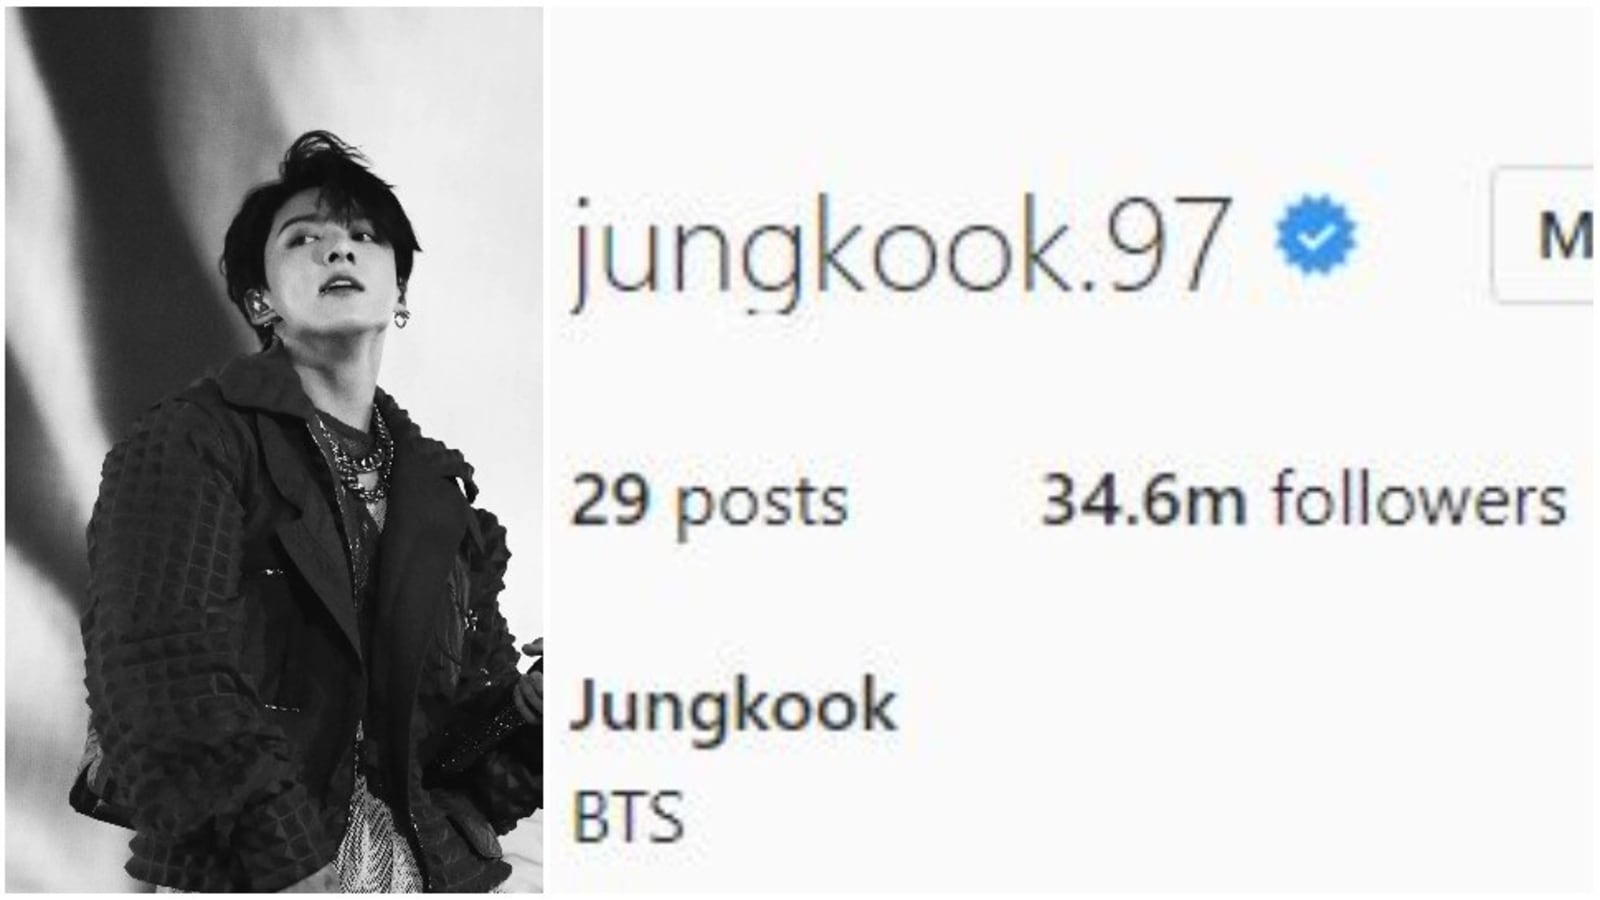 BTS’ Jungkook changes username on Instagram, ARMY says: ‘No one prepared me for this kind of heartbreak’